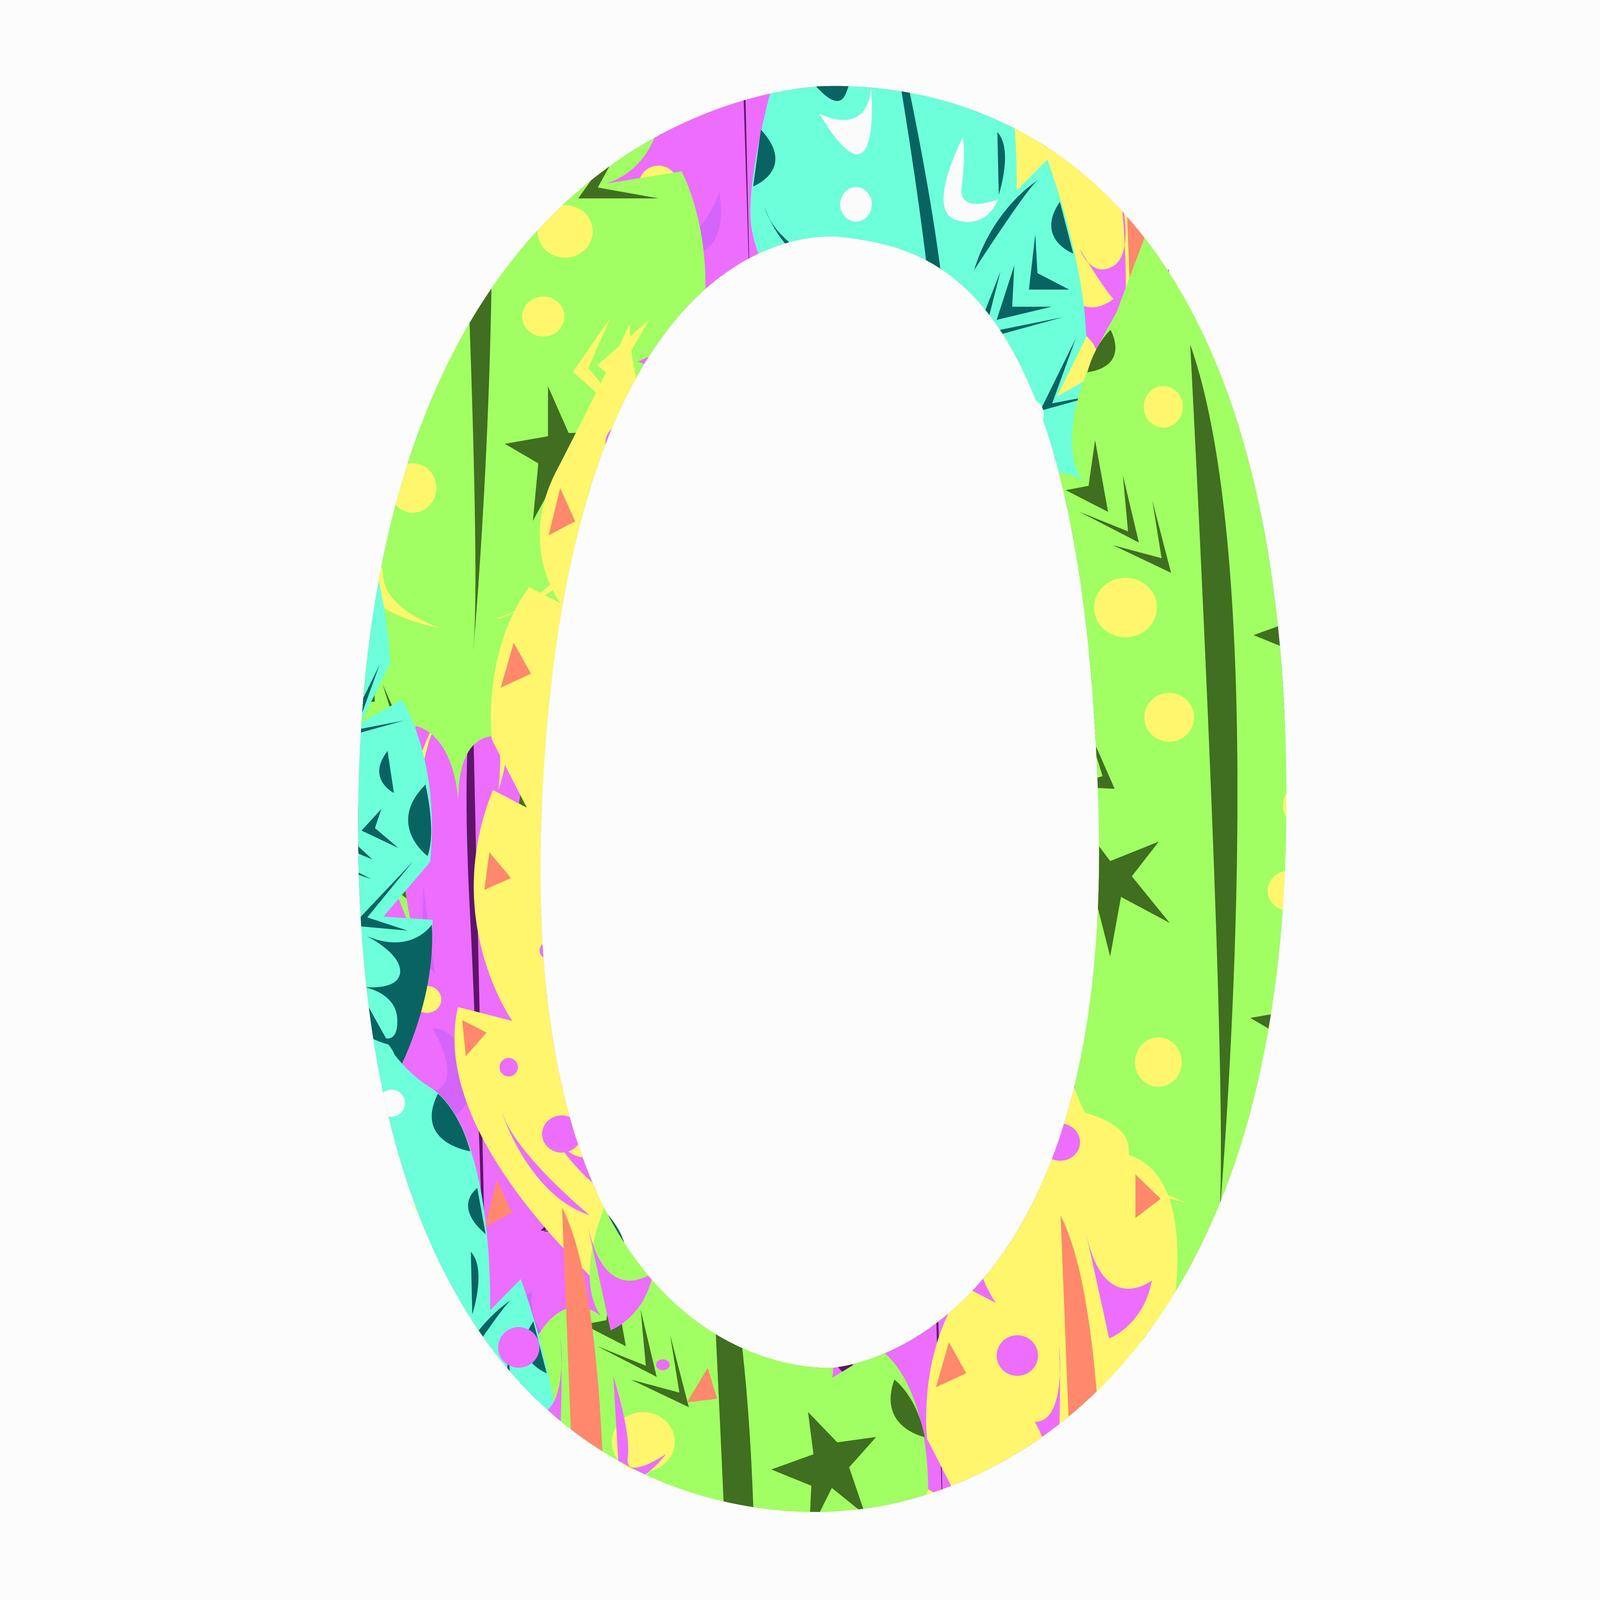 Stylized number zero with an abstract pattern in bright colors.